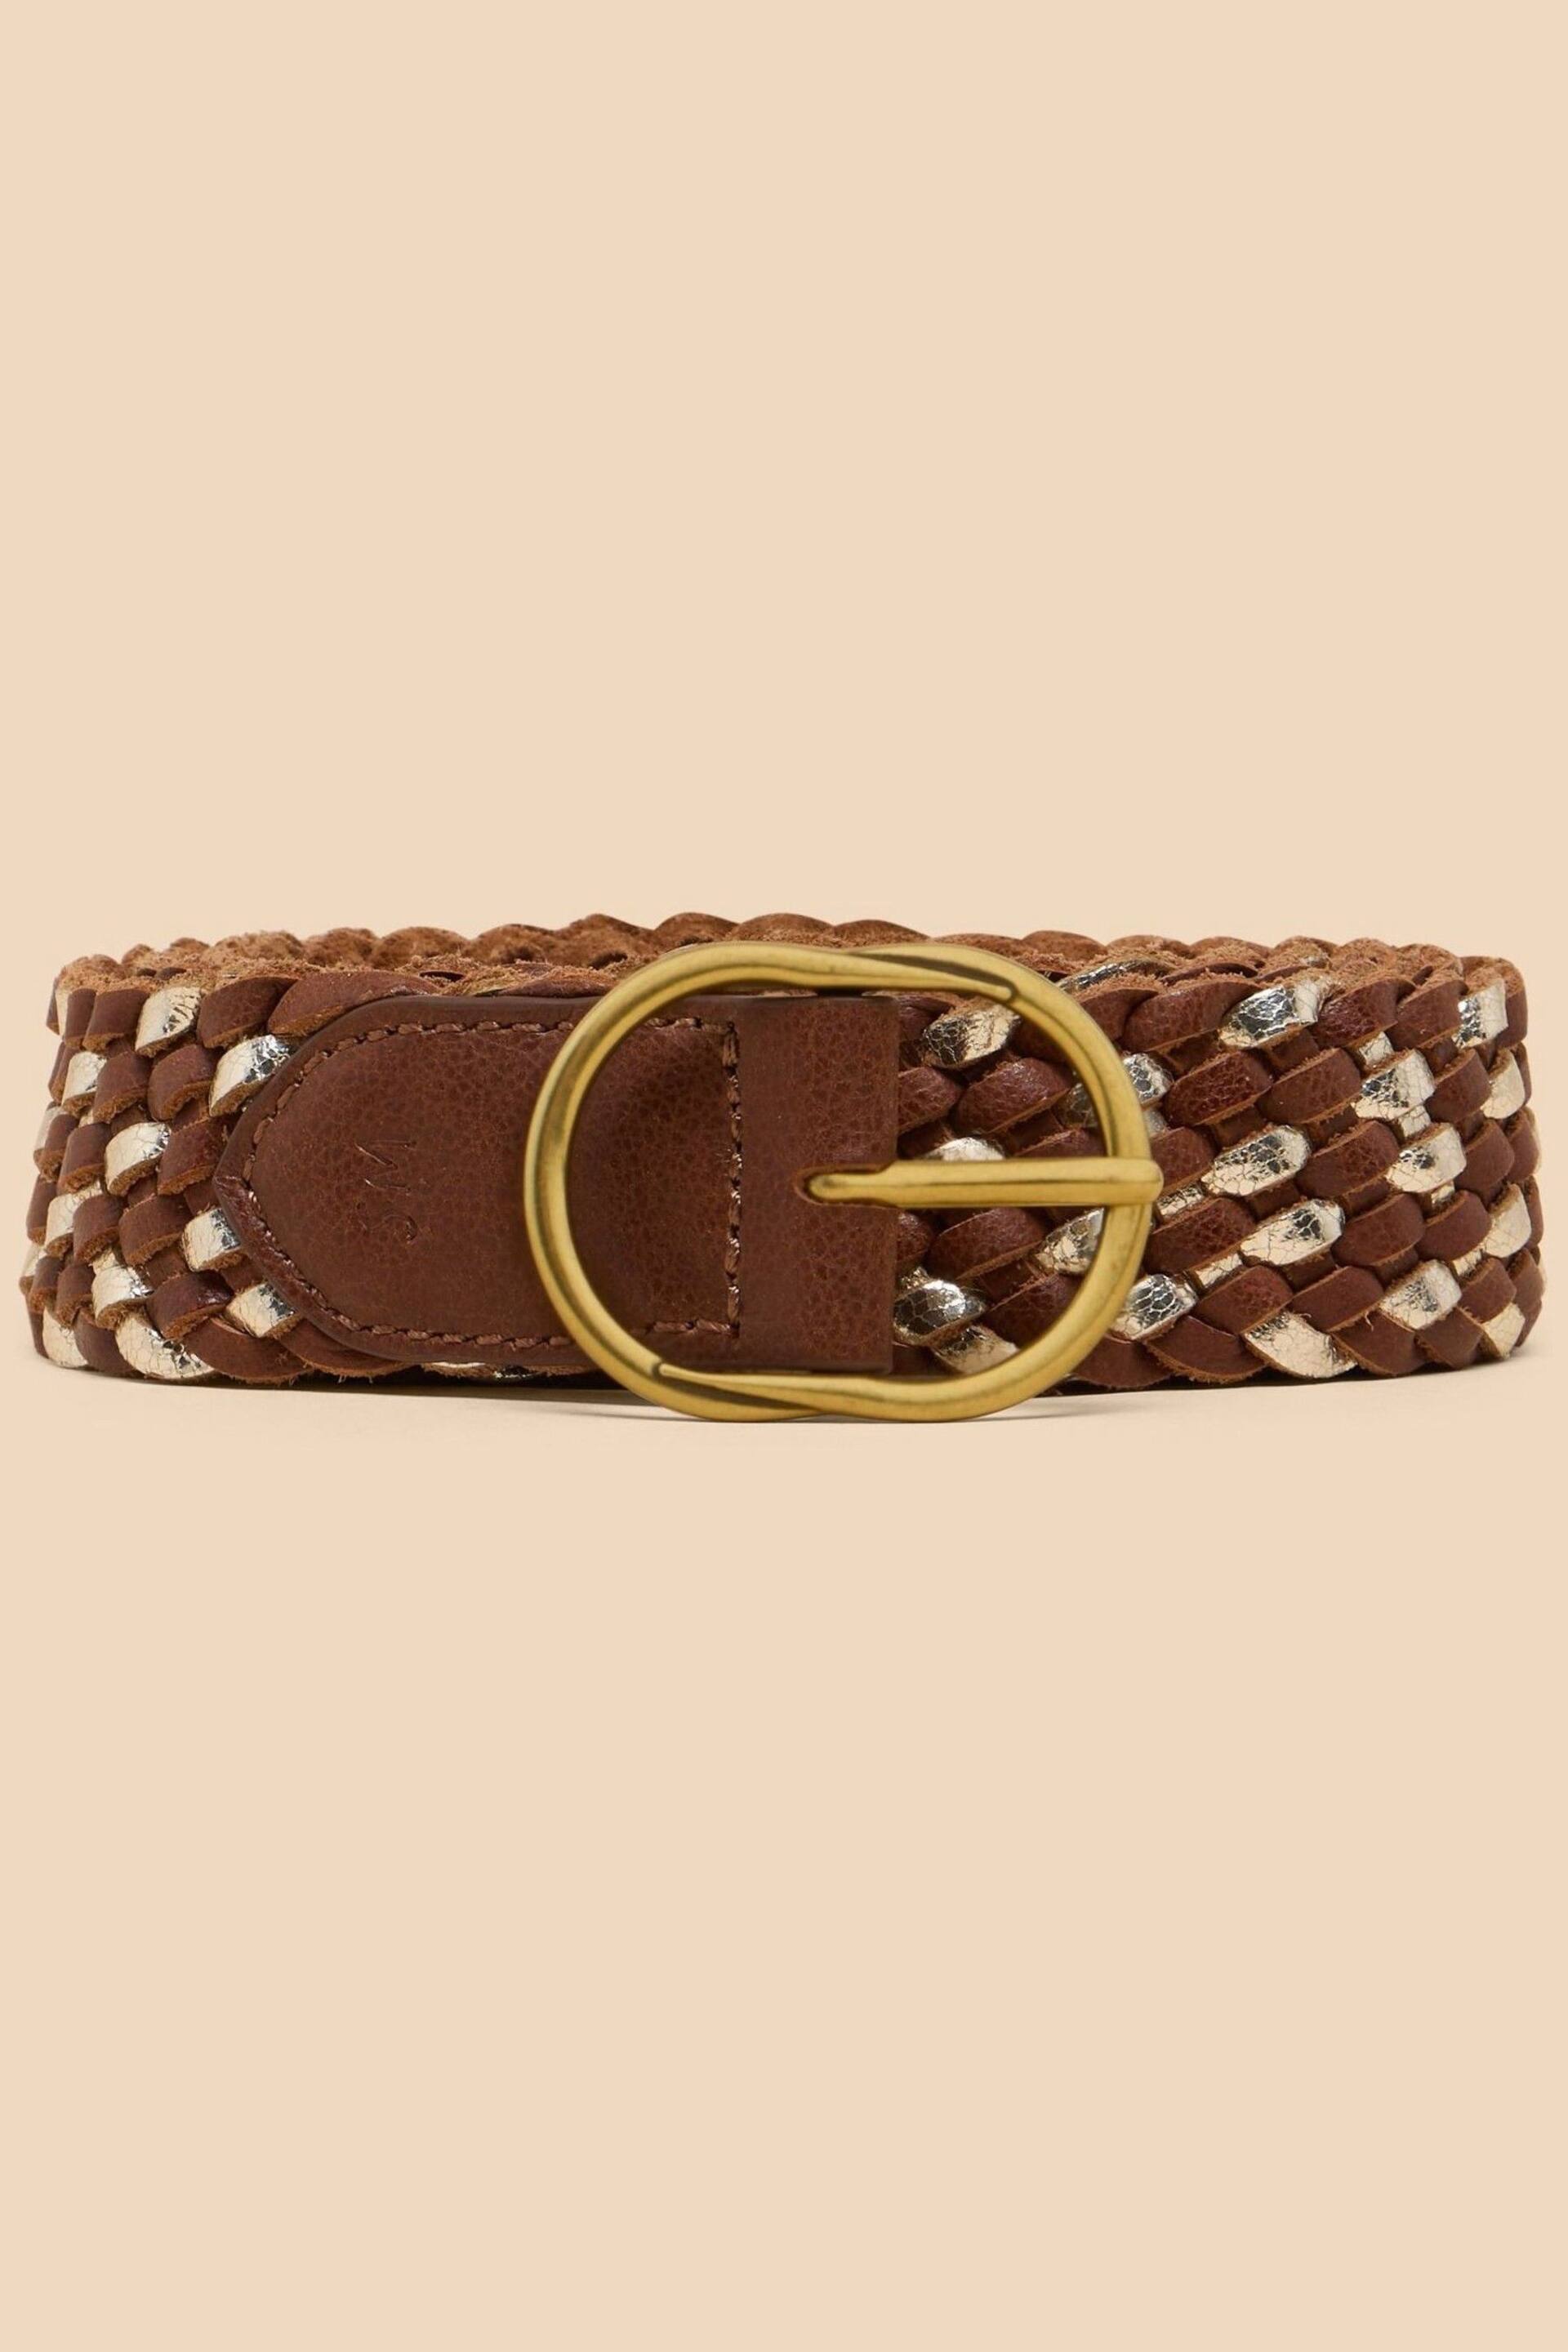 White Stuff Brown Leather Weave Belt - Image 1 of 3